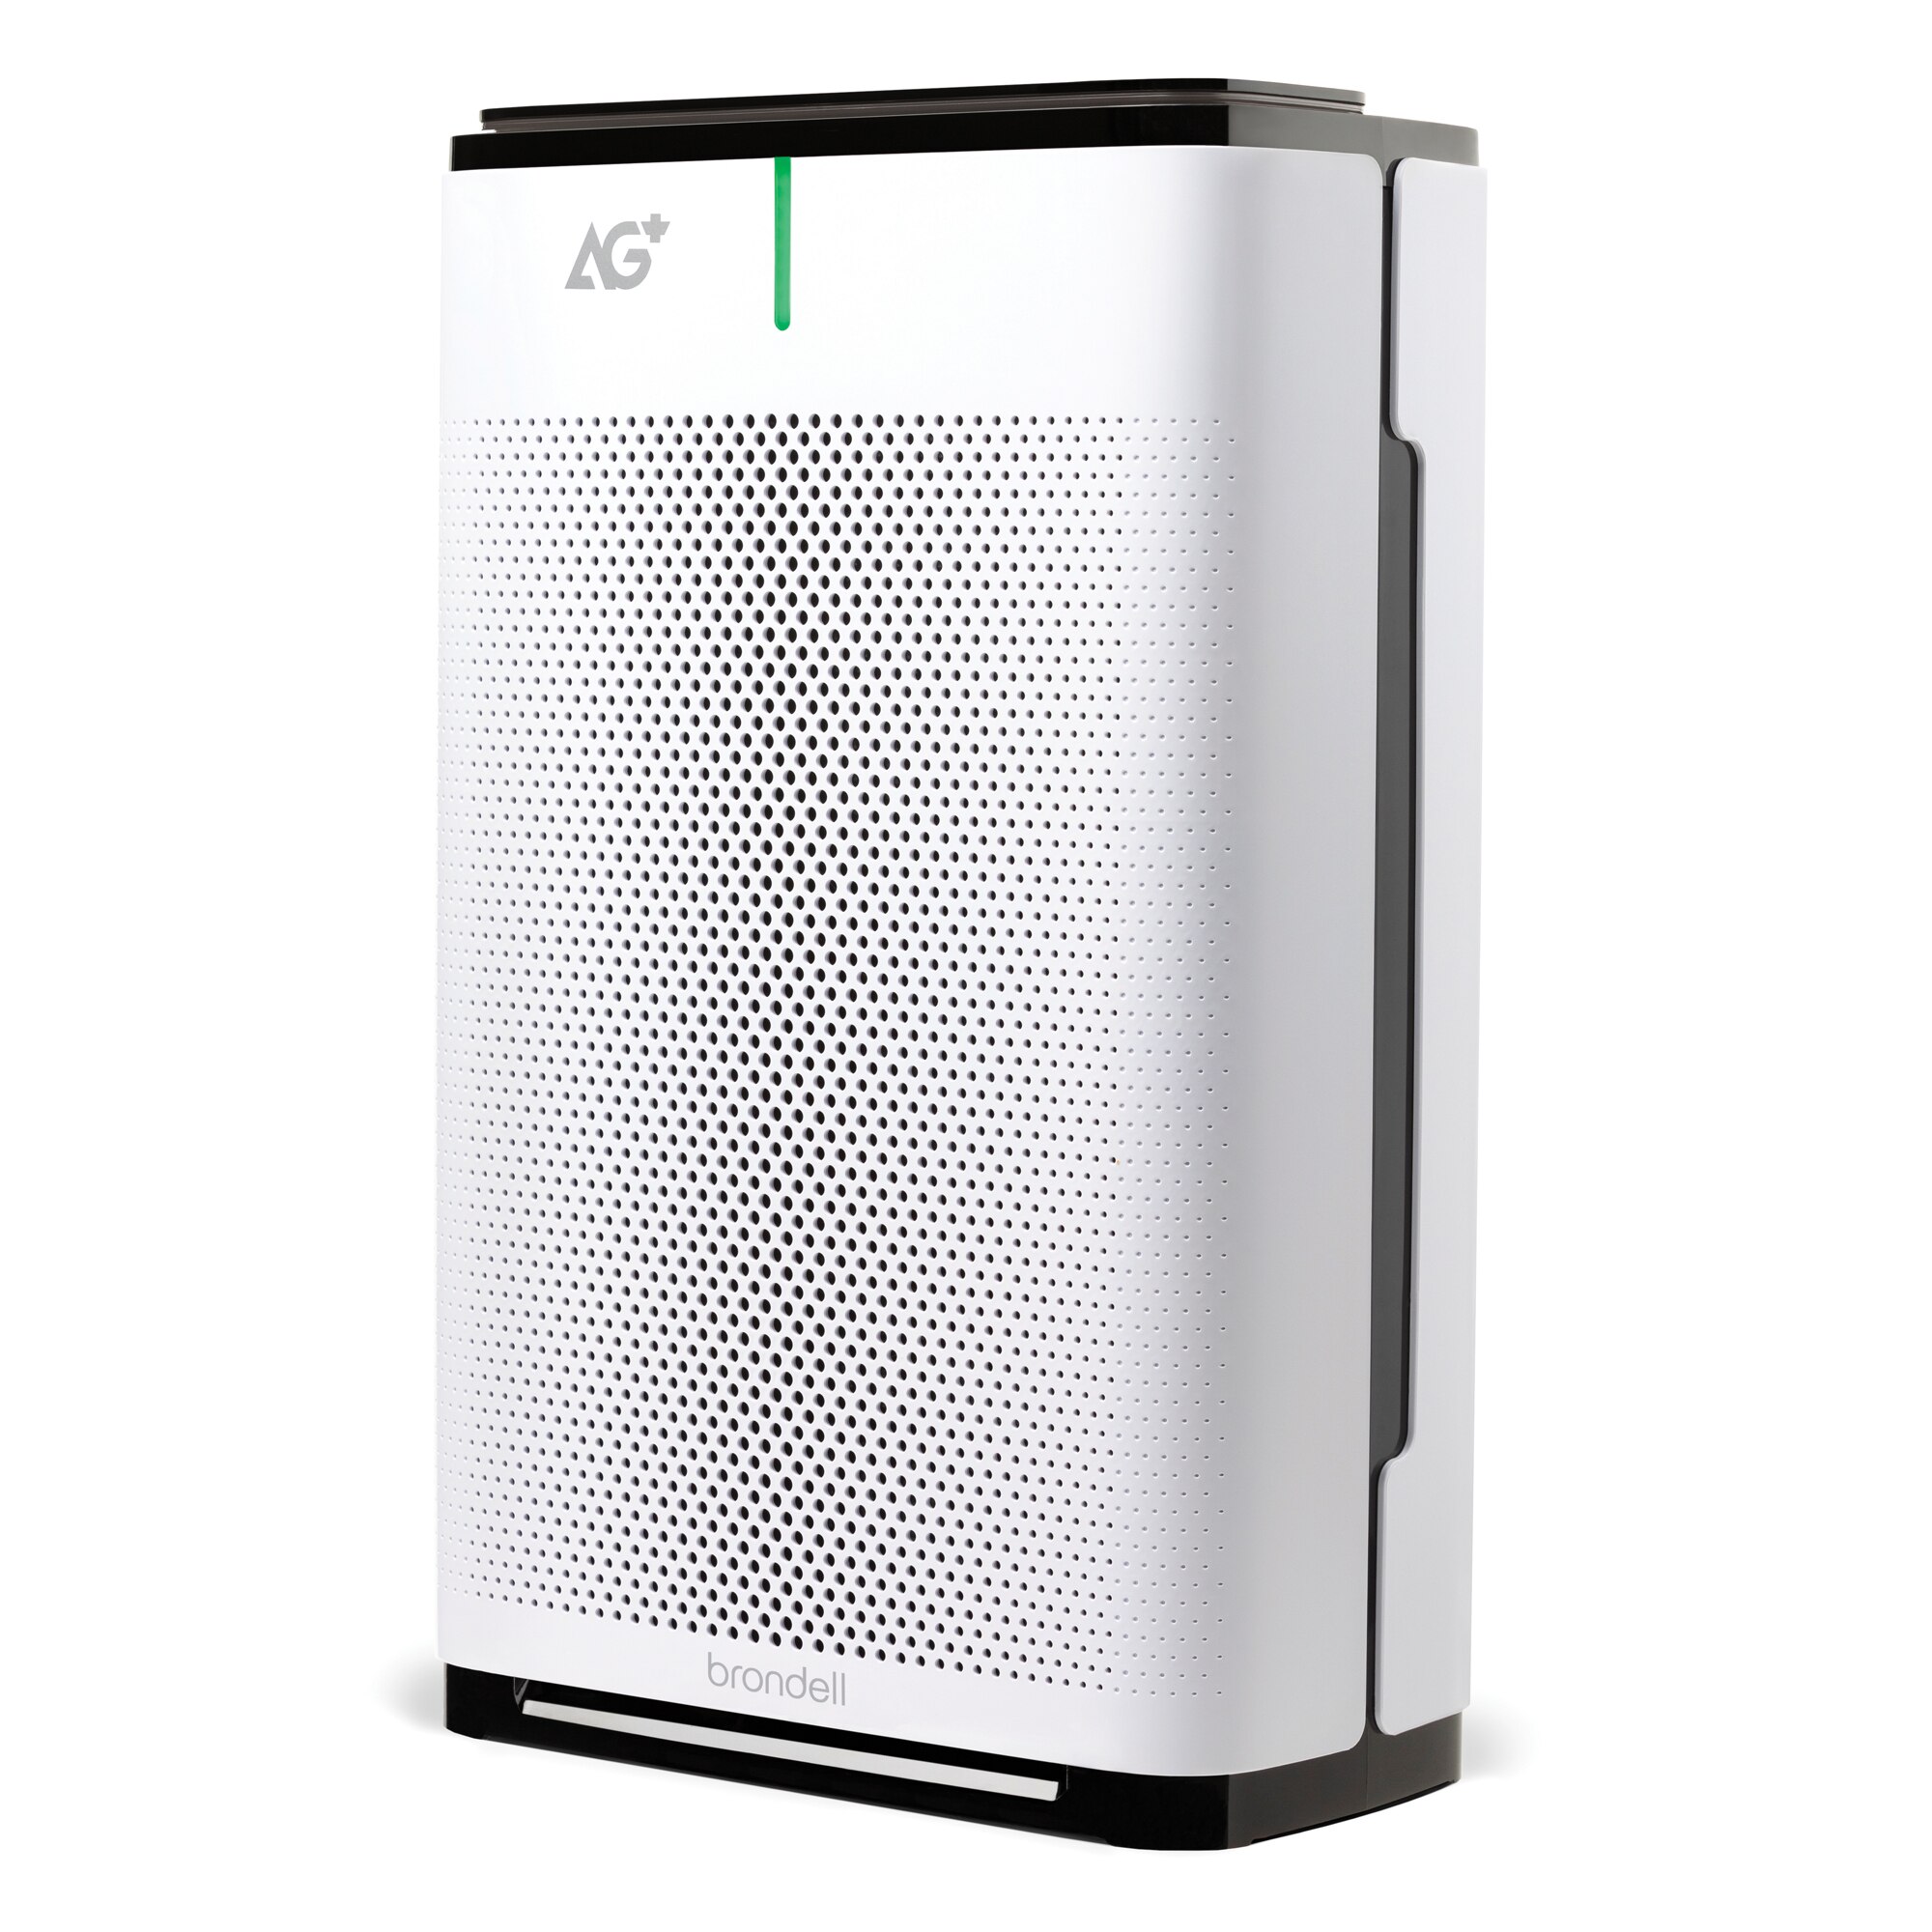 Brondell Pro Sanitizing Air Purifier With AG+ Technology For Purification Of SARS-CoV-2 , Virus, Bacteria And Allergens , CVS